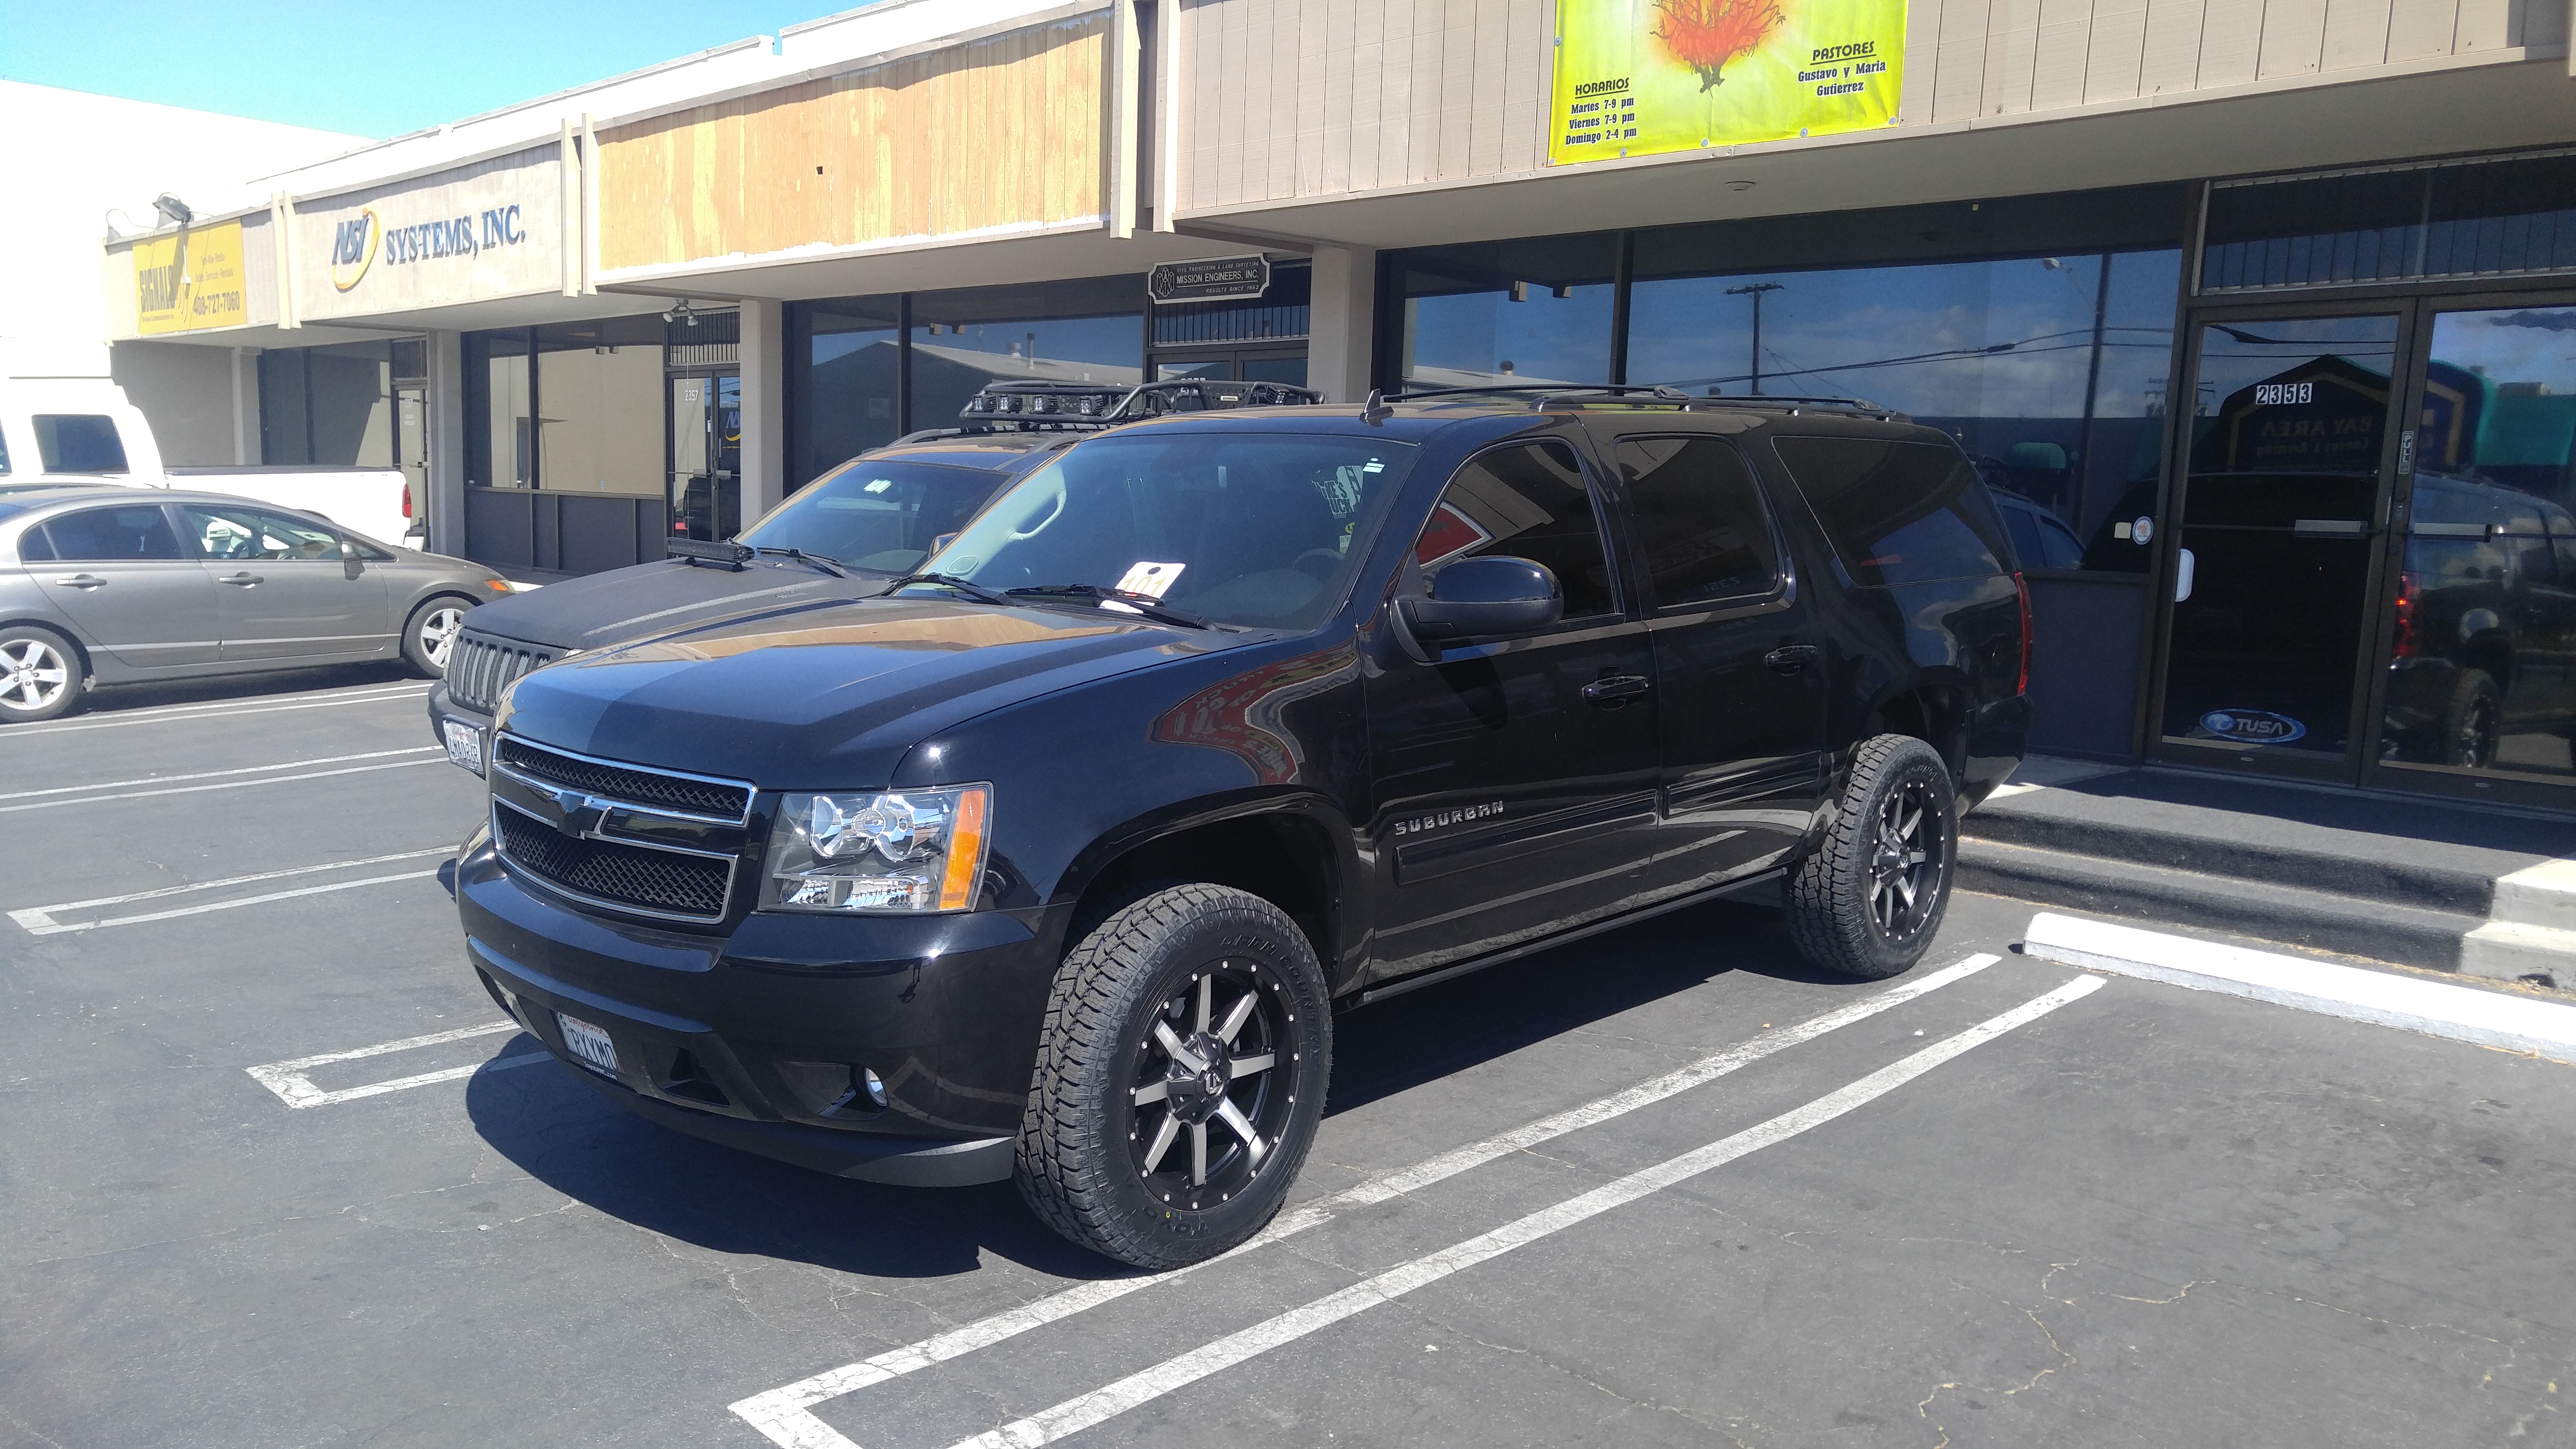 2014 Chevy Suburban 2.5" Leveling Kit 275/60R20 Toyo Open Country ATII Tires(33"Tall) 20X9 Fuel Maverick machined face